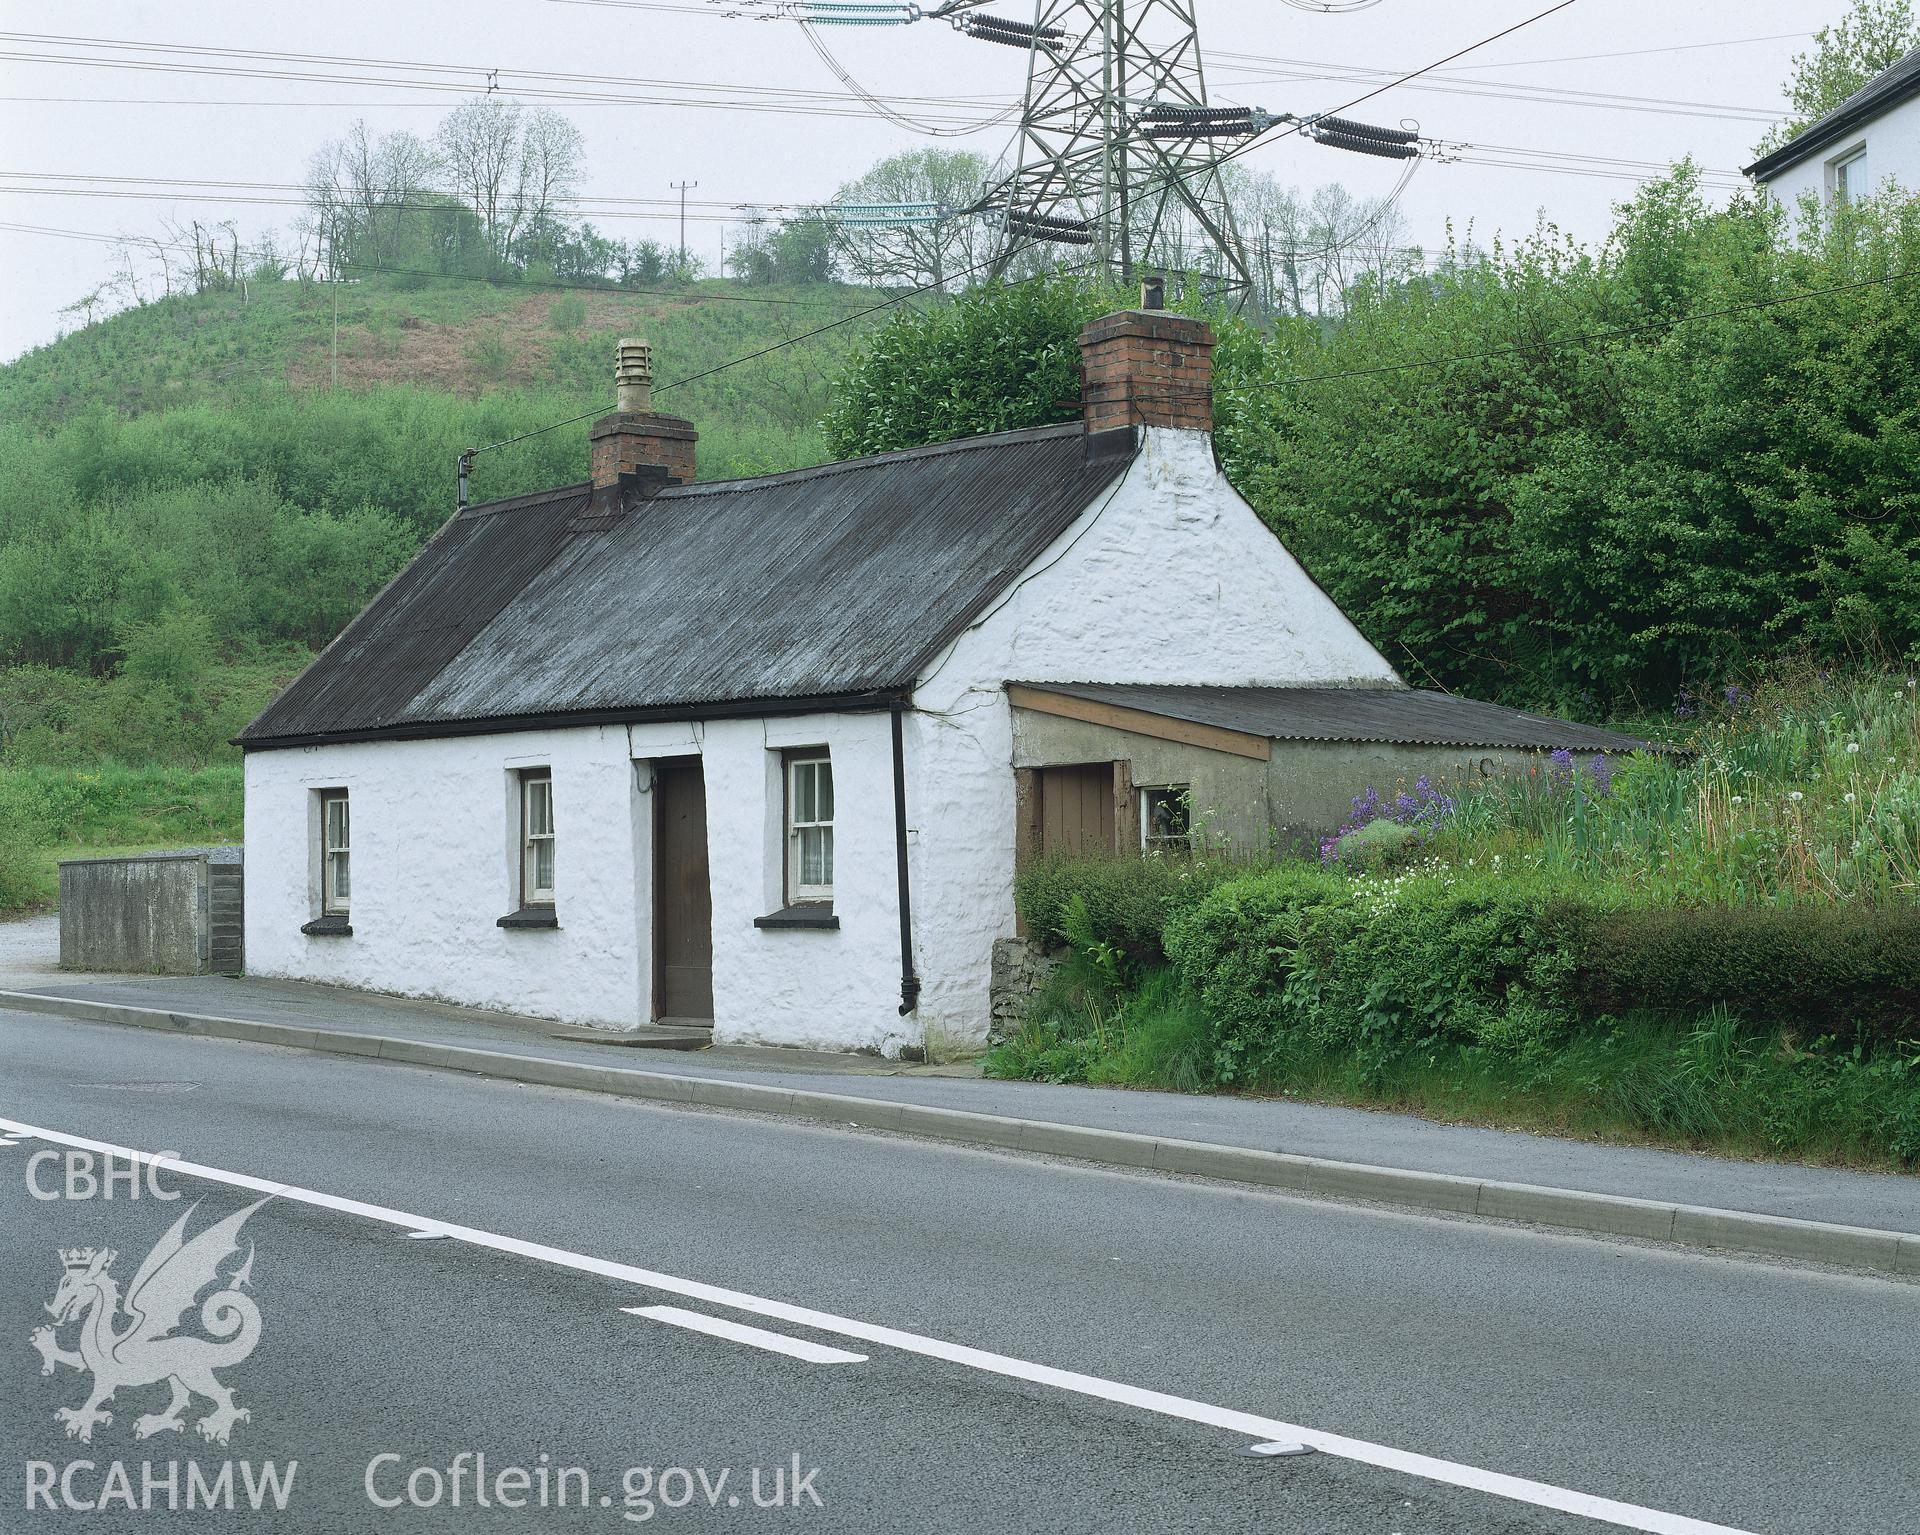 RCAHMW colour transparency showing exterior view of Talfan Cottage, Llanddowror.